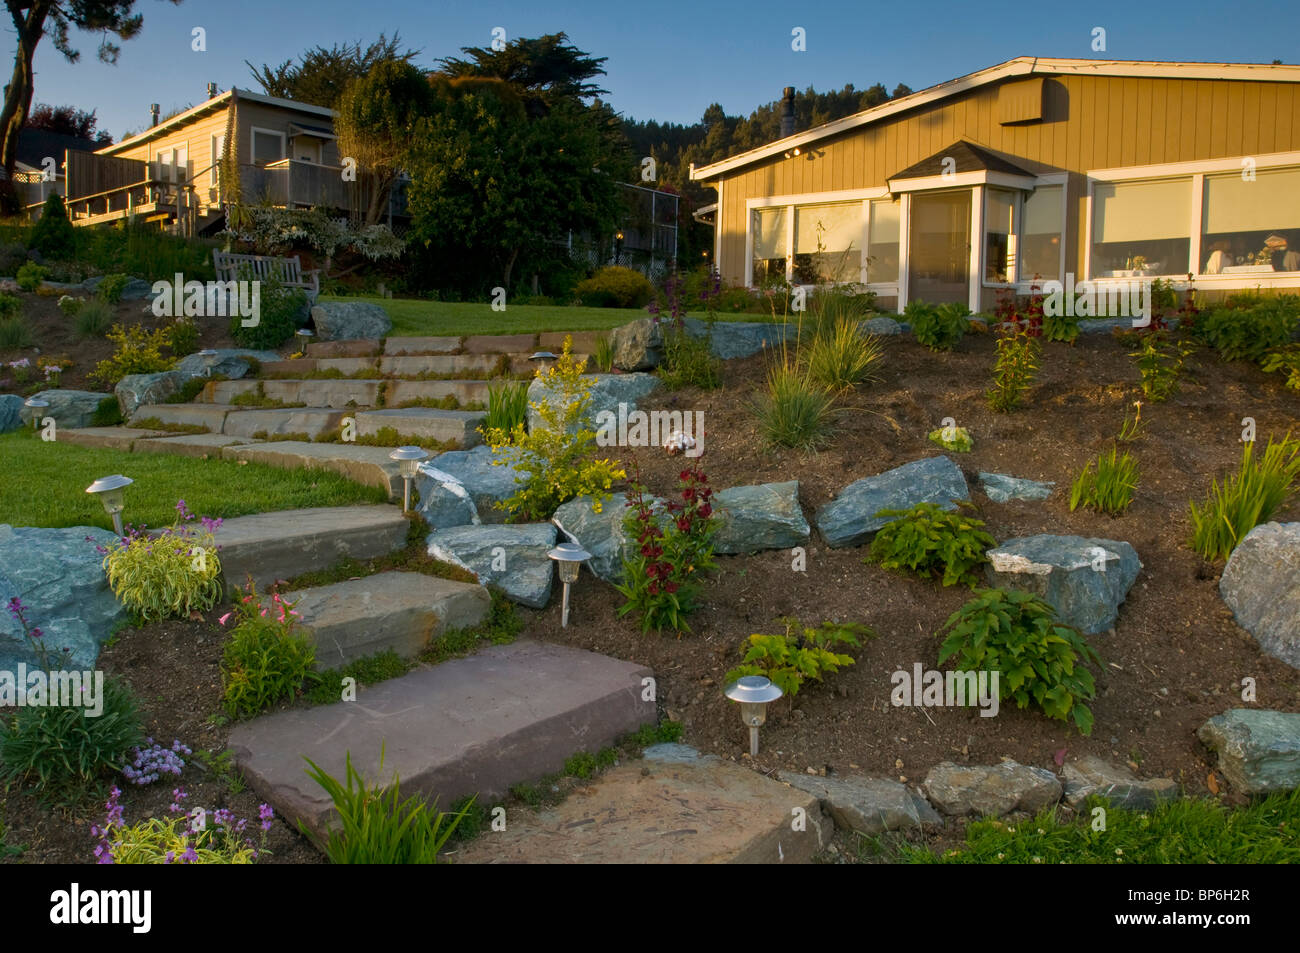 Sunset light on garden and restaurant at the Albion River Inn, Albion, Mendocino County, California Stock Photo